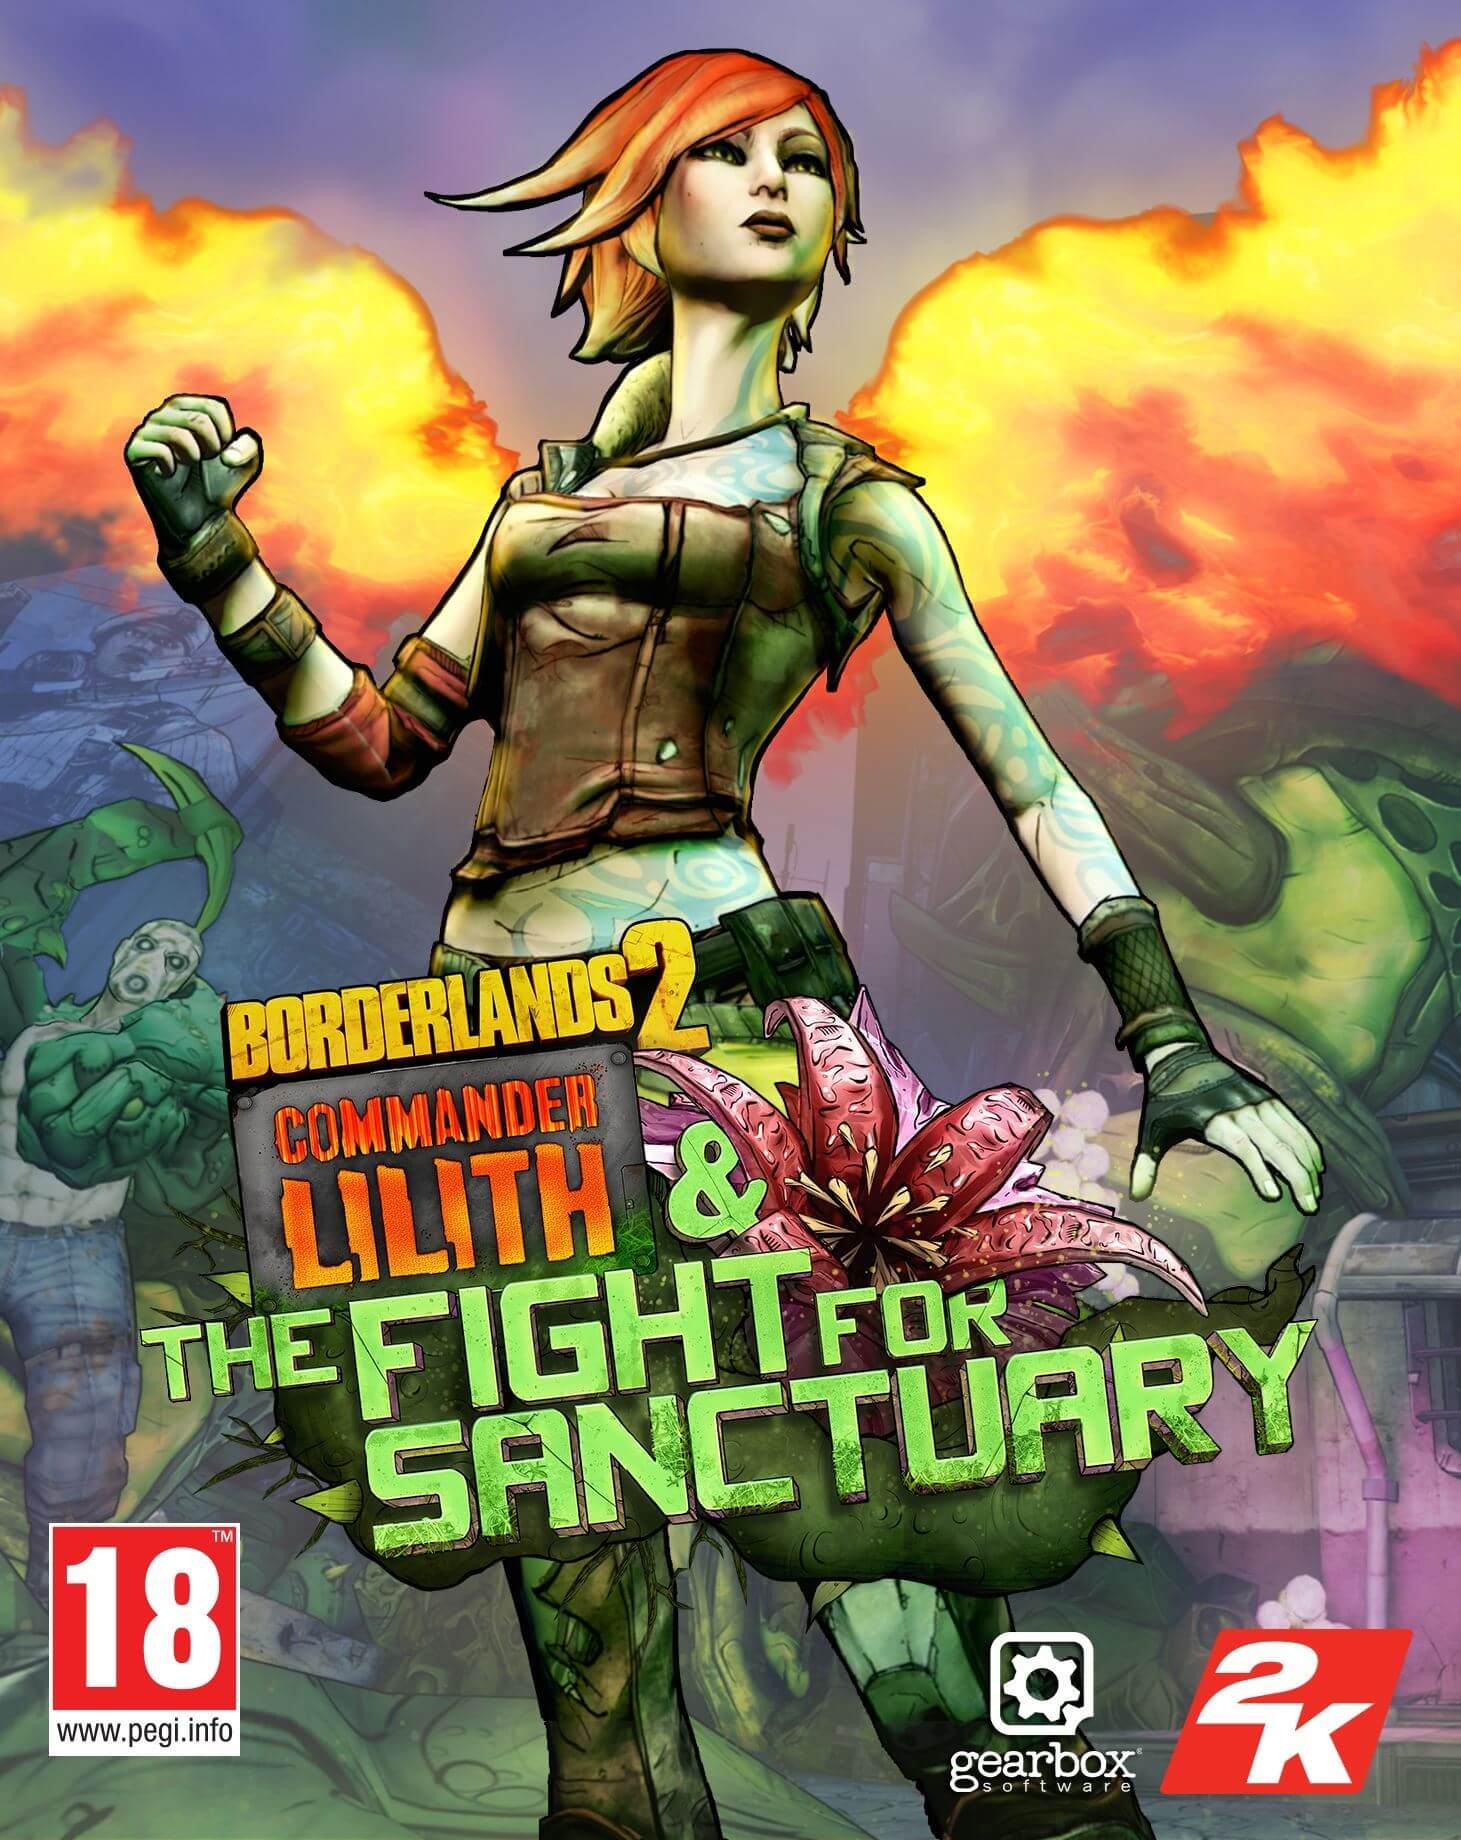 Borderlands 2: Commander Lilith & the Fight for Sanctuary (ROW)